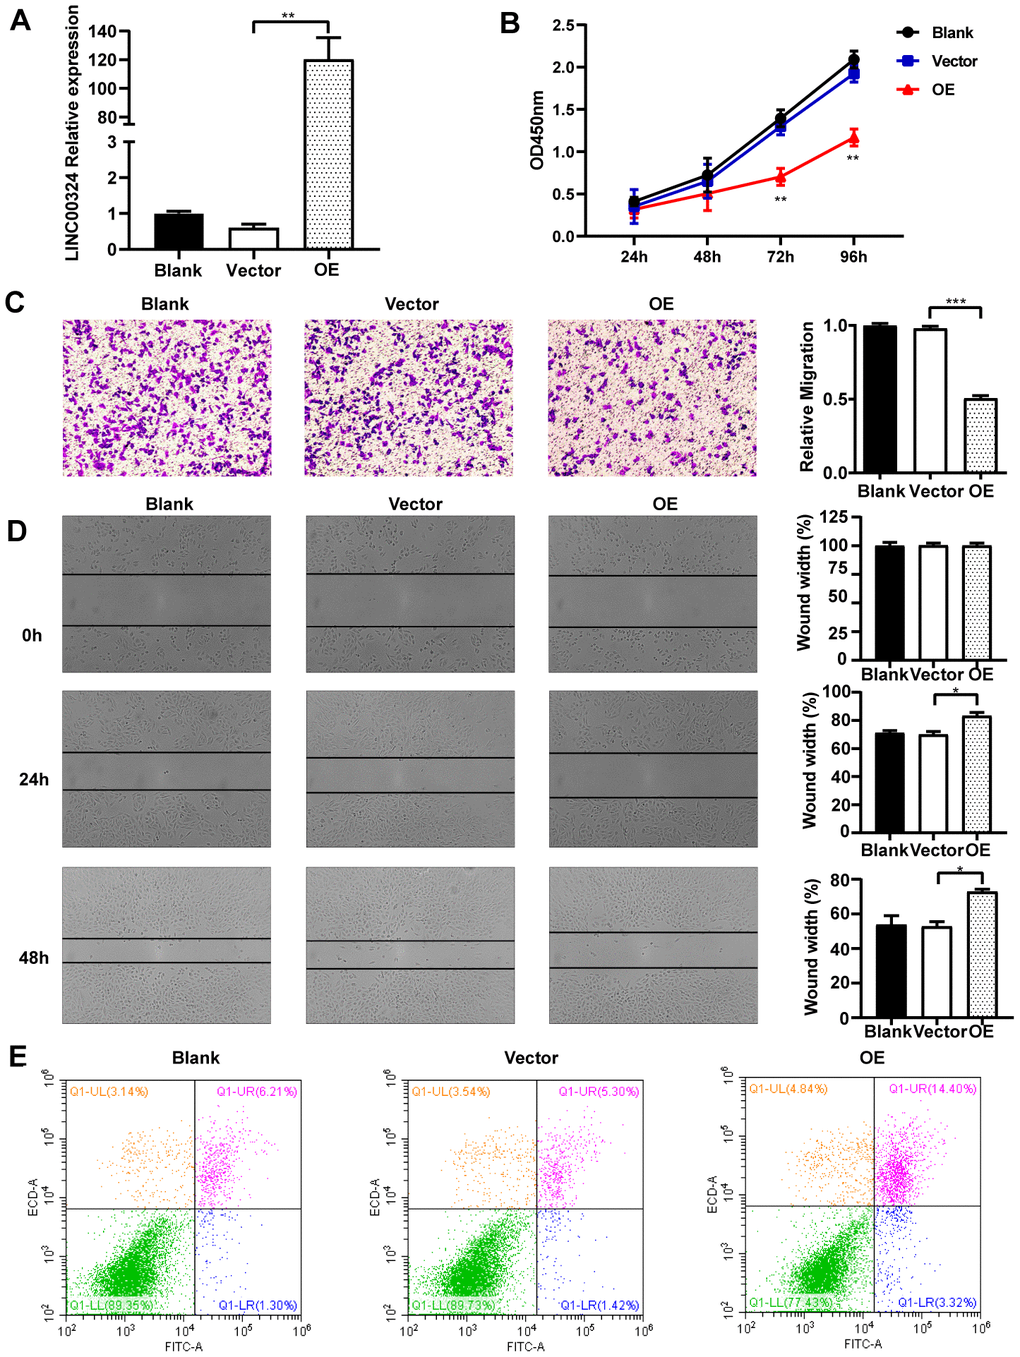 Overexpression of LINC00324 attenuates the cancer-related biological characteristics of MDA-MB-231 cells. (A) Lentivirus-mediated LINC00324 overexpression vectors were constructed and validated by qRT-PCR. (B) Proliferation of MDA-MB-231 cells in response to LINC00324 overexpression, measured using MTT assay. (C, D) Representative images of transwell assay showing MDA-MB-231 cells’ migration across the membrane after LINC00324 overexpression. Shown are images of immunohistochemical staining and the scratch wound healing assay. The histograms show the average number of migrated cells per field, calculated from five representative fields. (E) Apoptosis was assessed by flow cytometry in MDA-MB-231 cells after overexpression of LINC00324. All data are shown as means ± SEM. * P P P A, B), or are representative of three independent experiments with similar results (C–E).